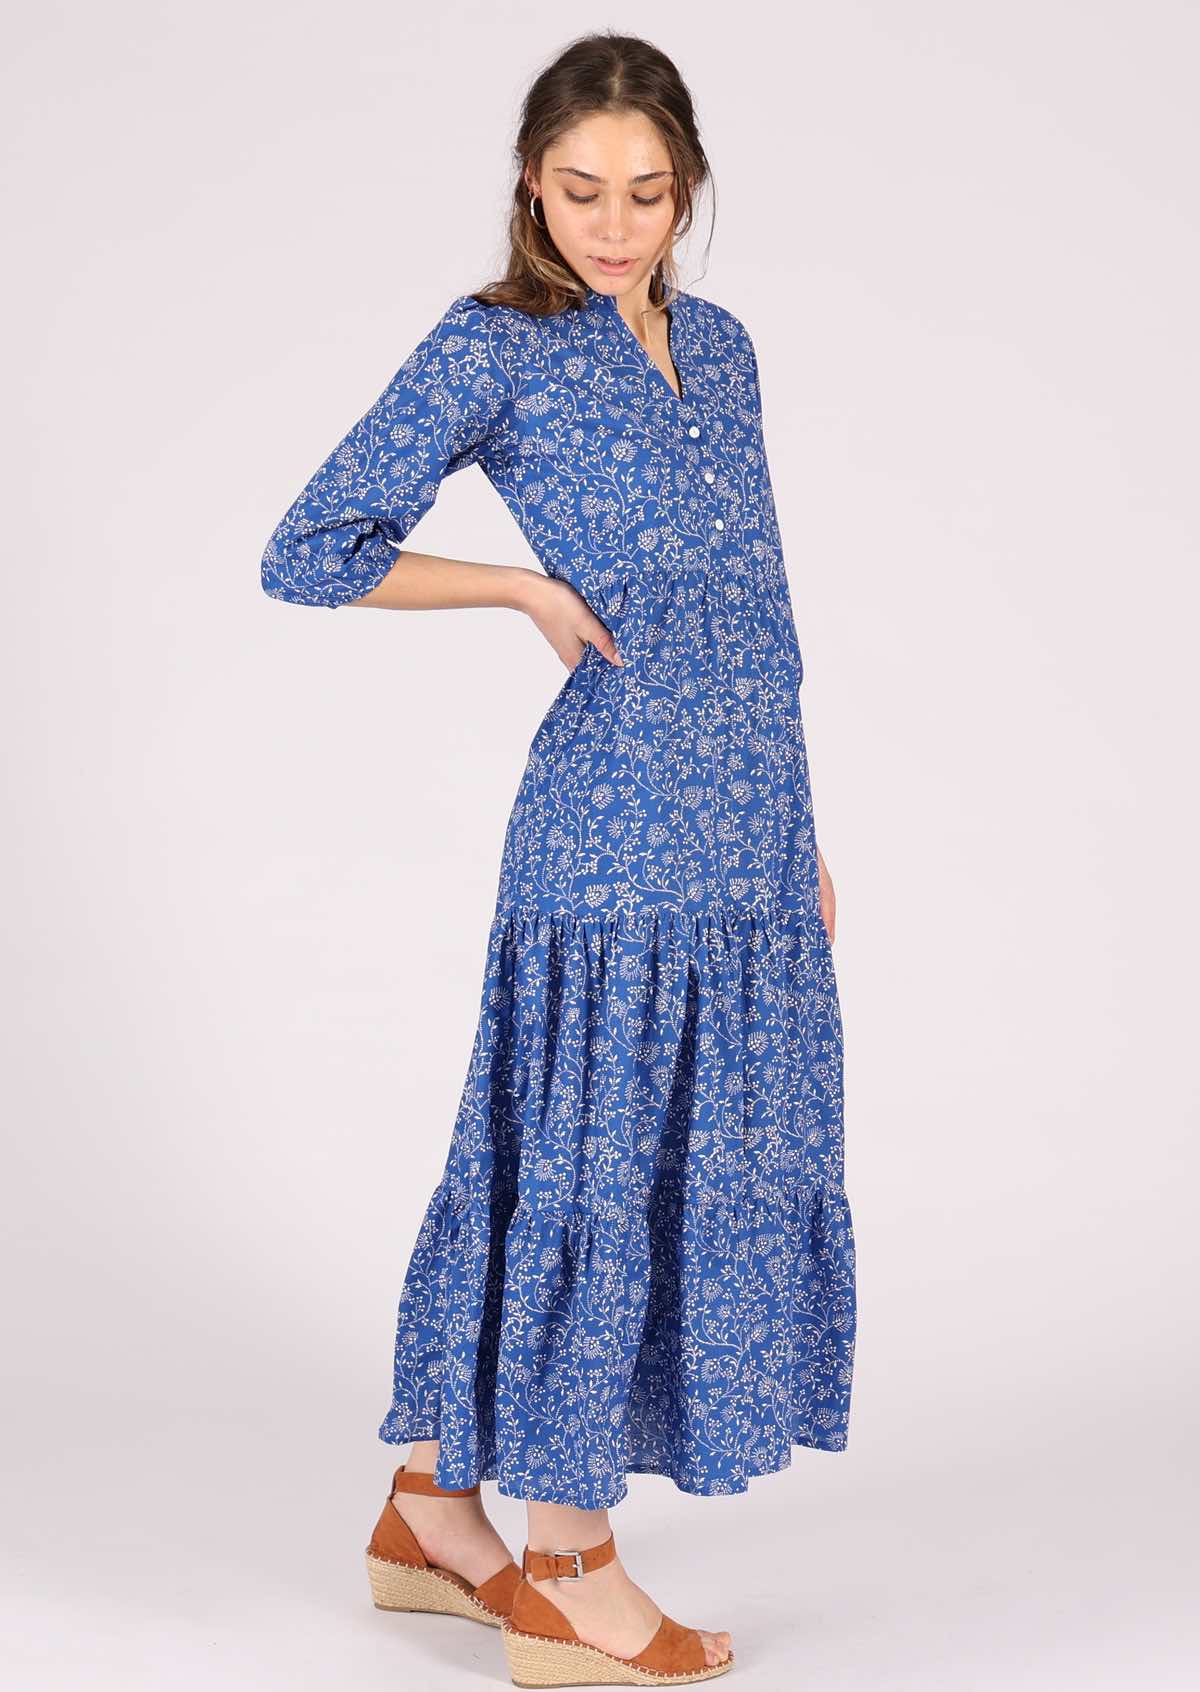 Tiered maxi dress with hidden side pockets